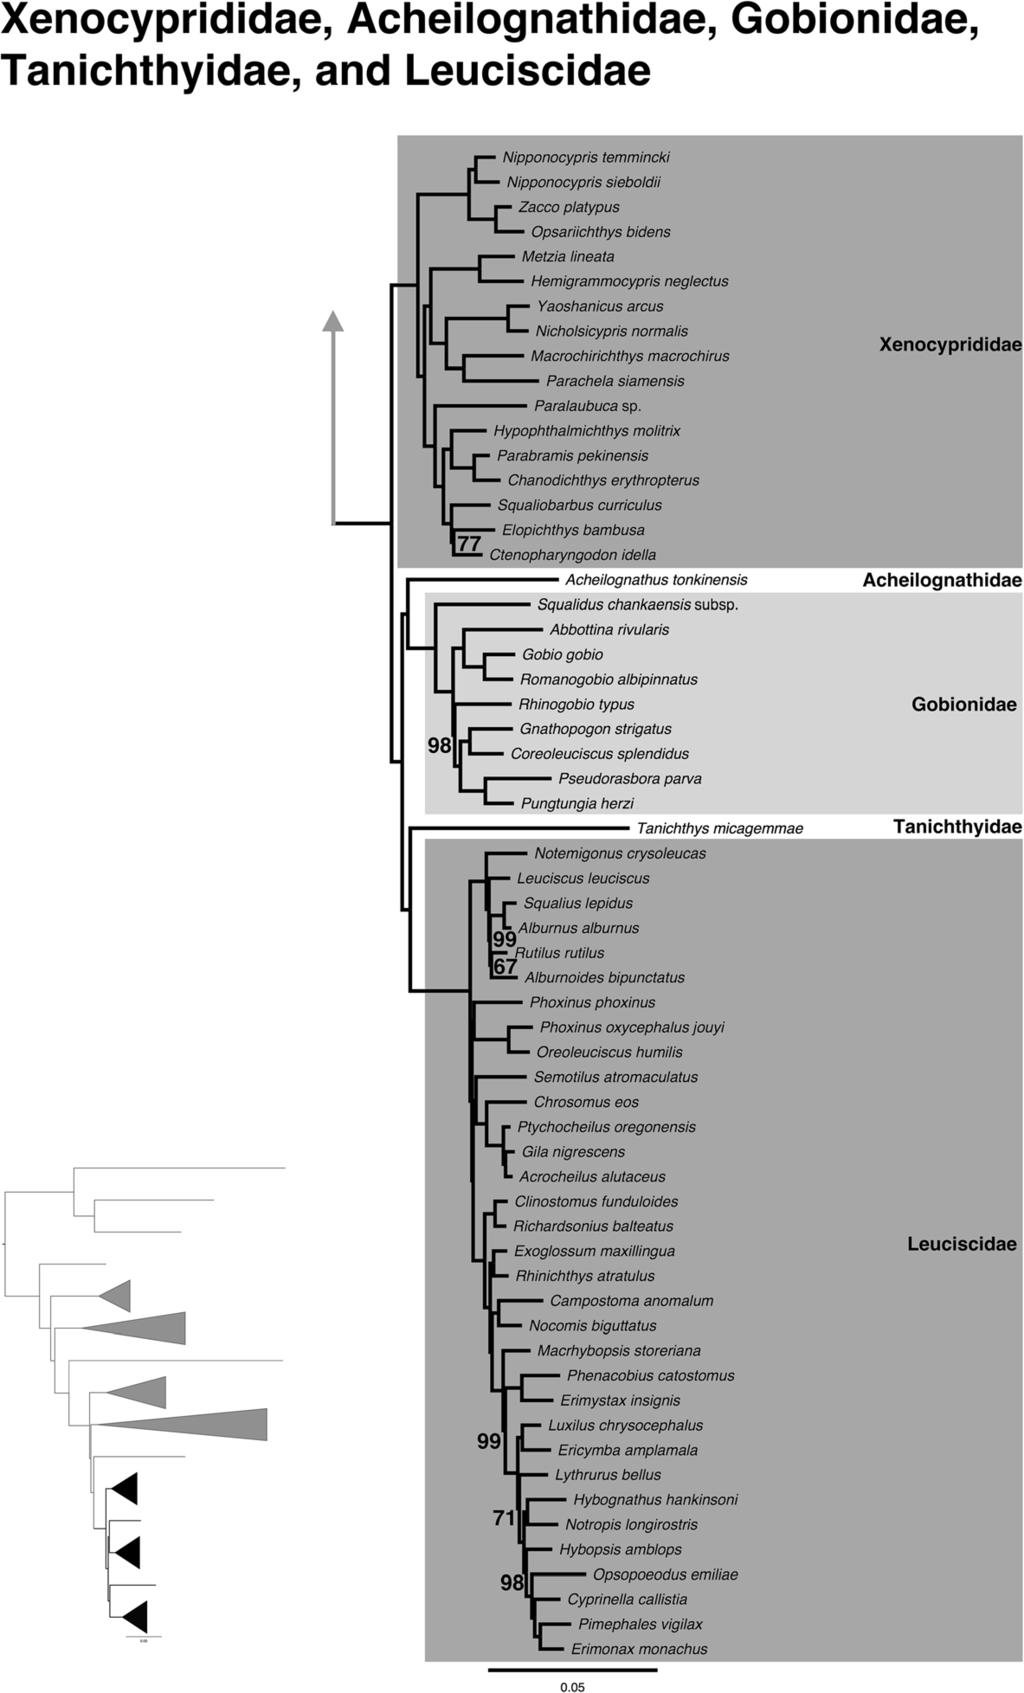 Stout et al. BMC Evolutionary Biology (2016) 16:244 Page 10 of 13 Fig. 6 Expansion of Xenocyprididae, Acheilognathidae, Gobionidae, Tanichthyidae, and Leuciscidae from the ML tree shown in Fig.